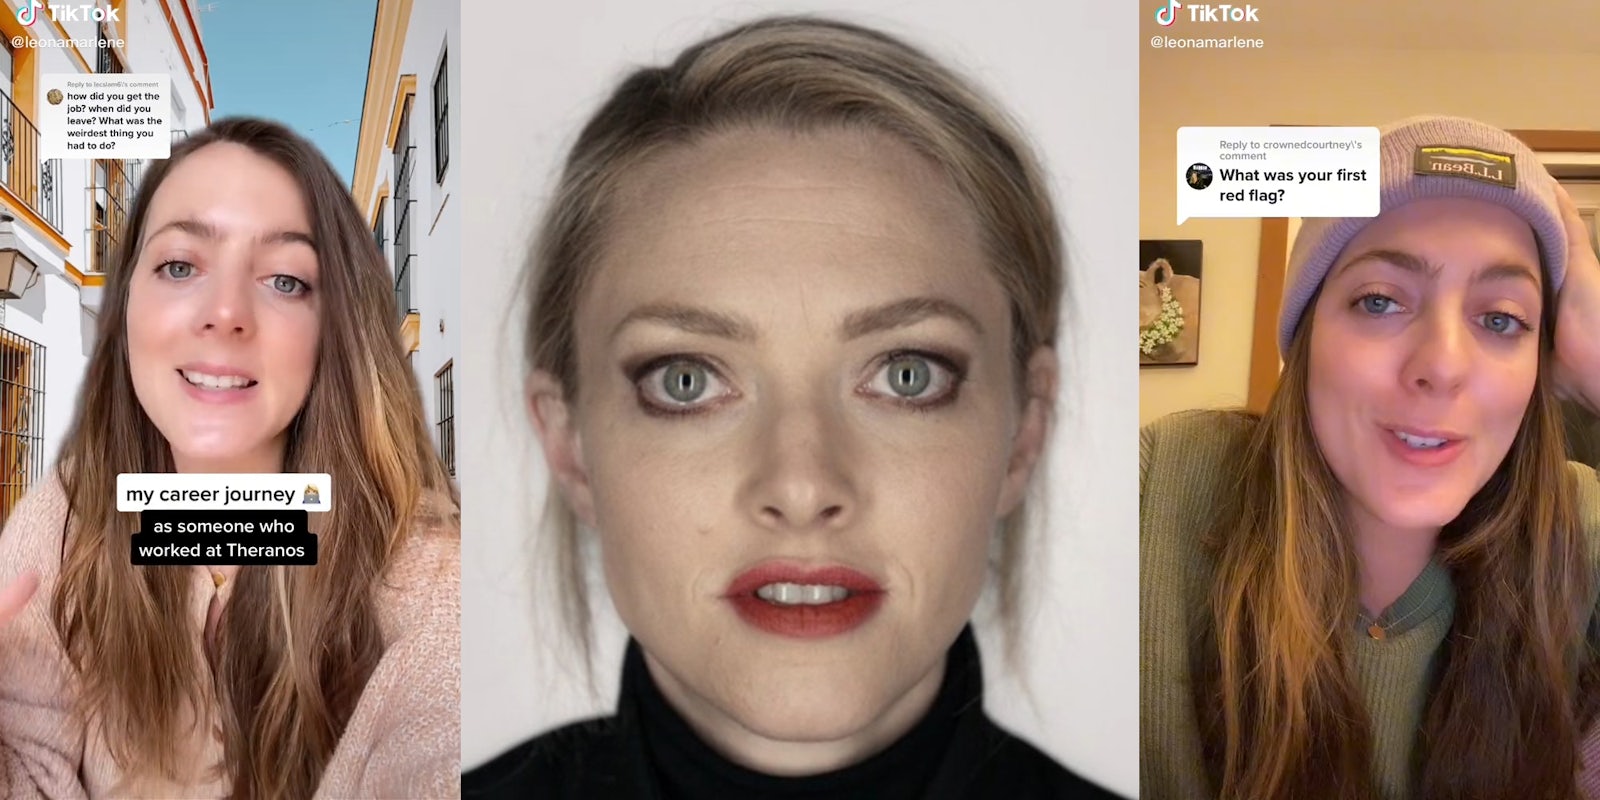 young woman with caption 'my career journey as someone who worked at Theranos' (l) Amanda Seyfried as Elizabeth Holmes (c) same young woman with caption 'What was your first red flag?' (r)